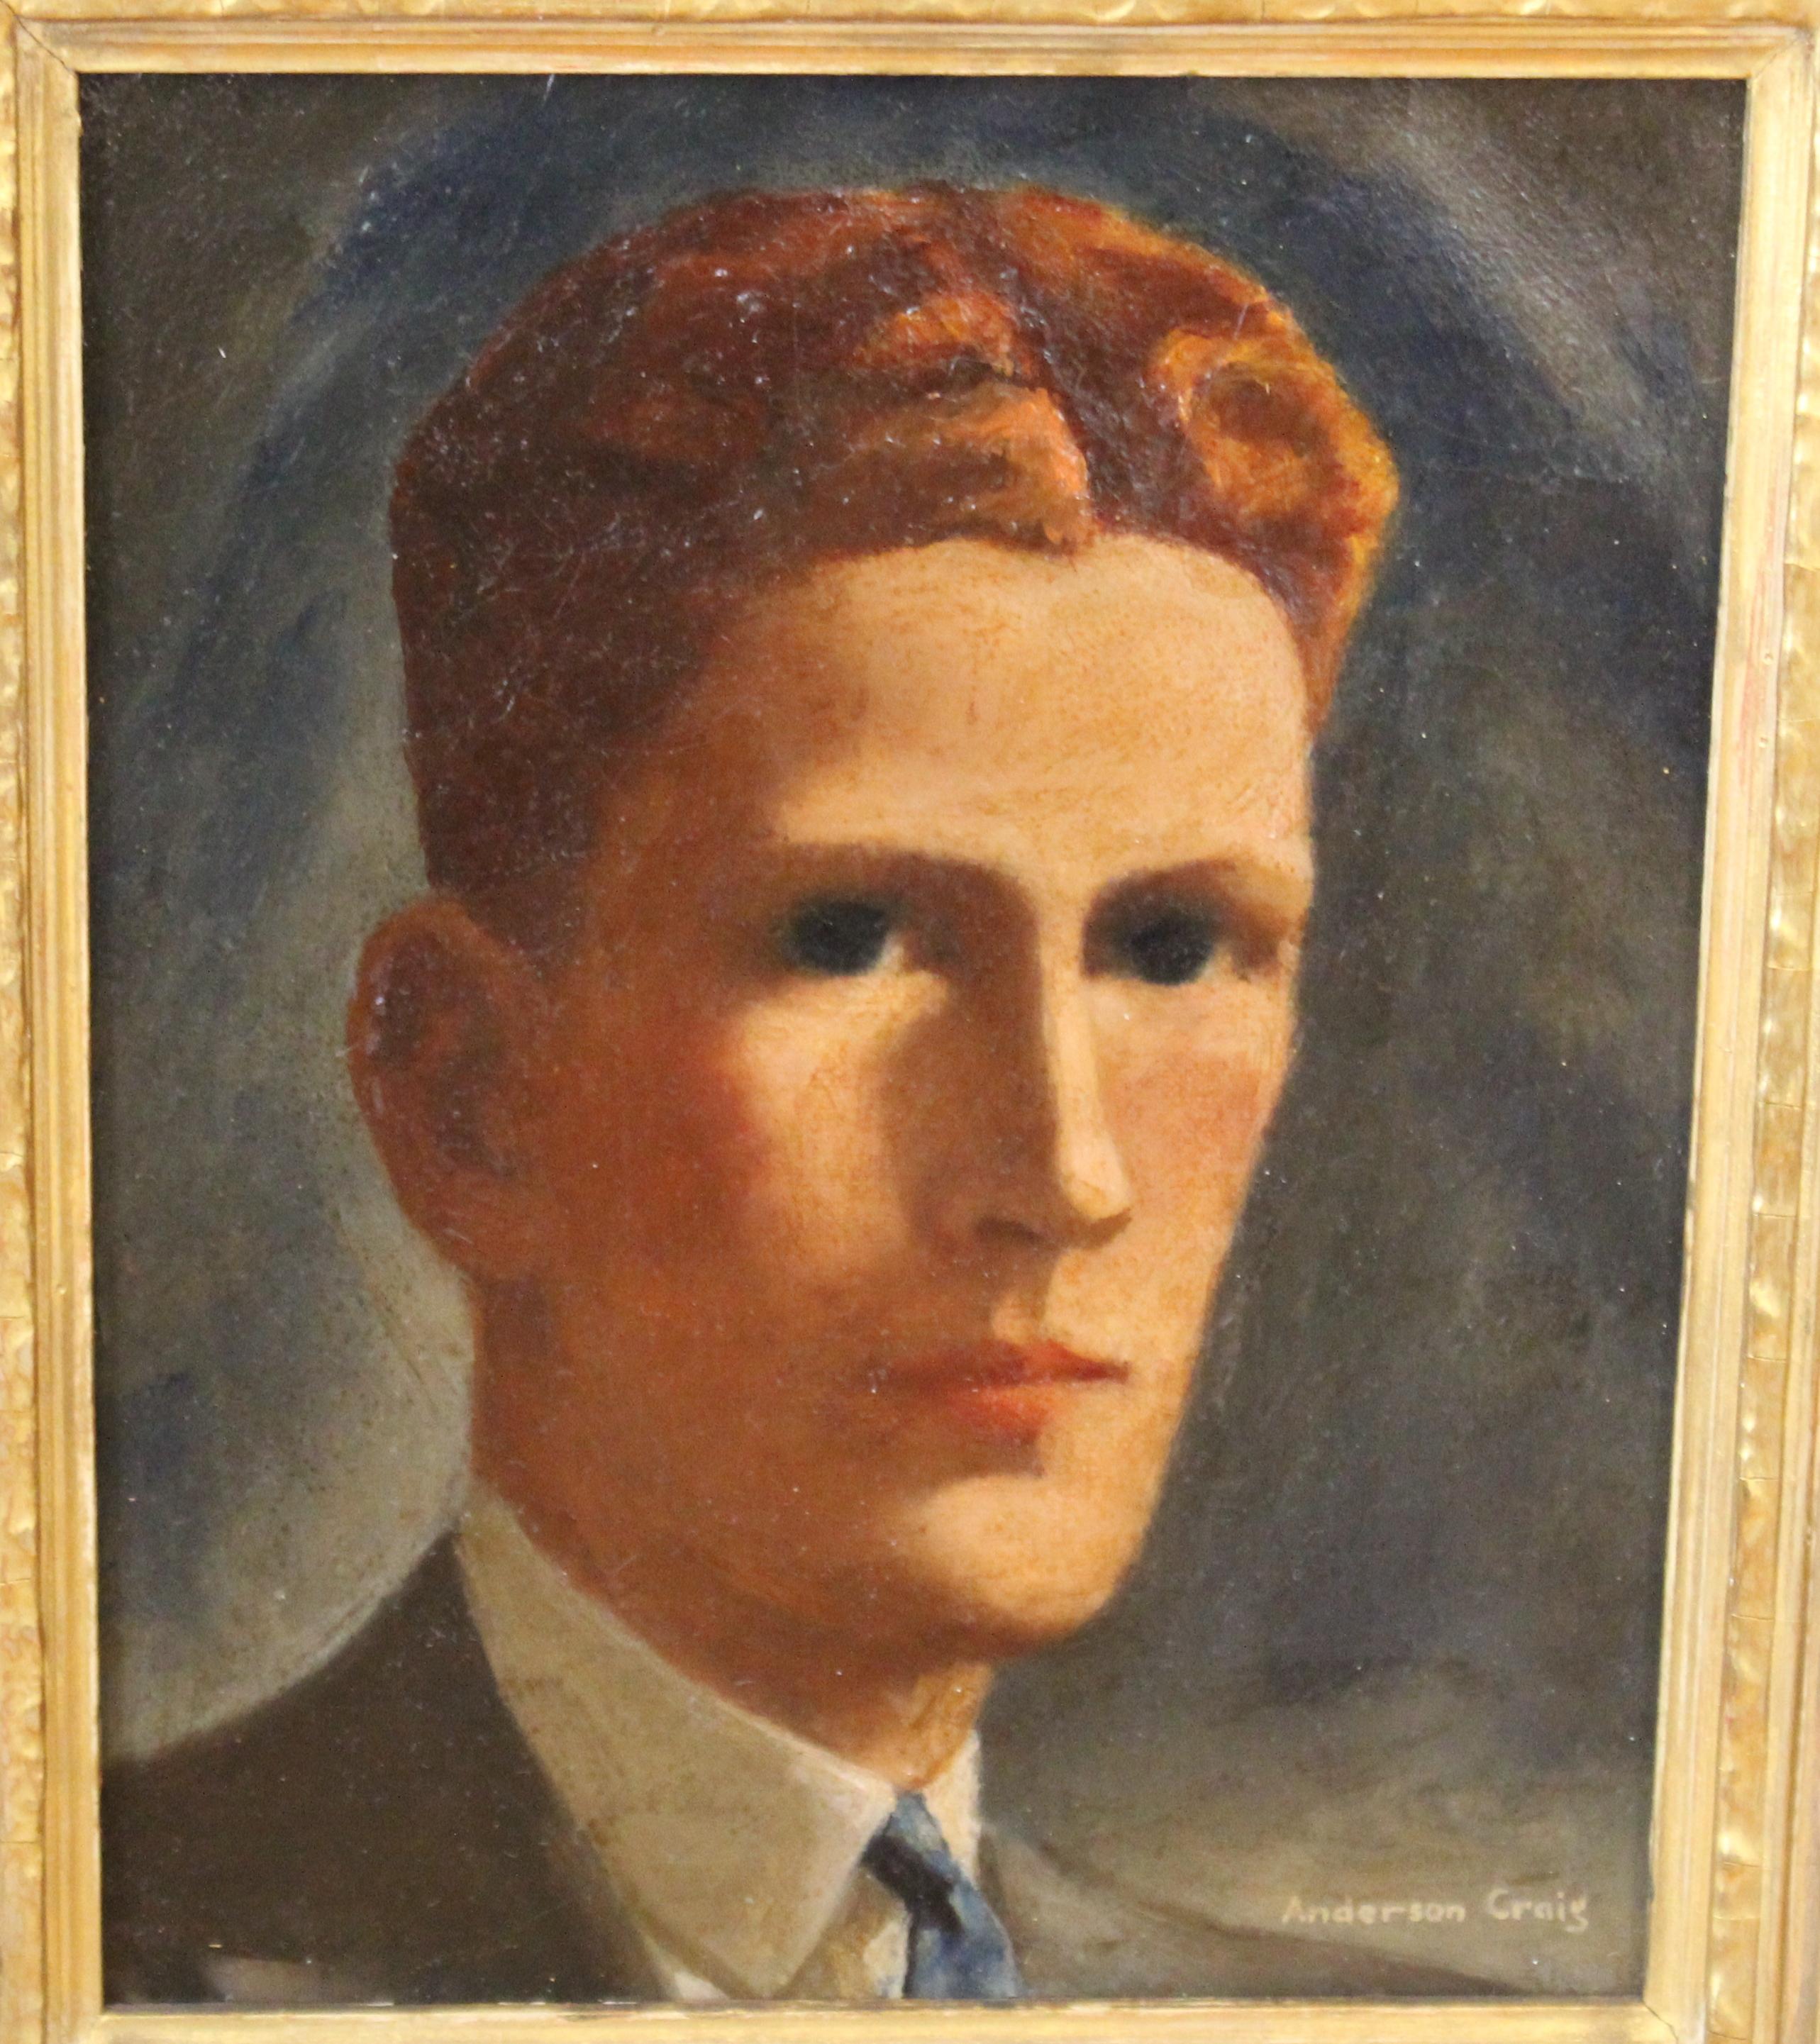 American Gothic style oil on canvas portrait painting of a young man with red hair. The piece was created by Anderson Craig (American born 1904) in the 1930s and is signed by the artist in the lower right corner.
Framed in a Newcomb-Macklin Co.